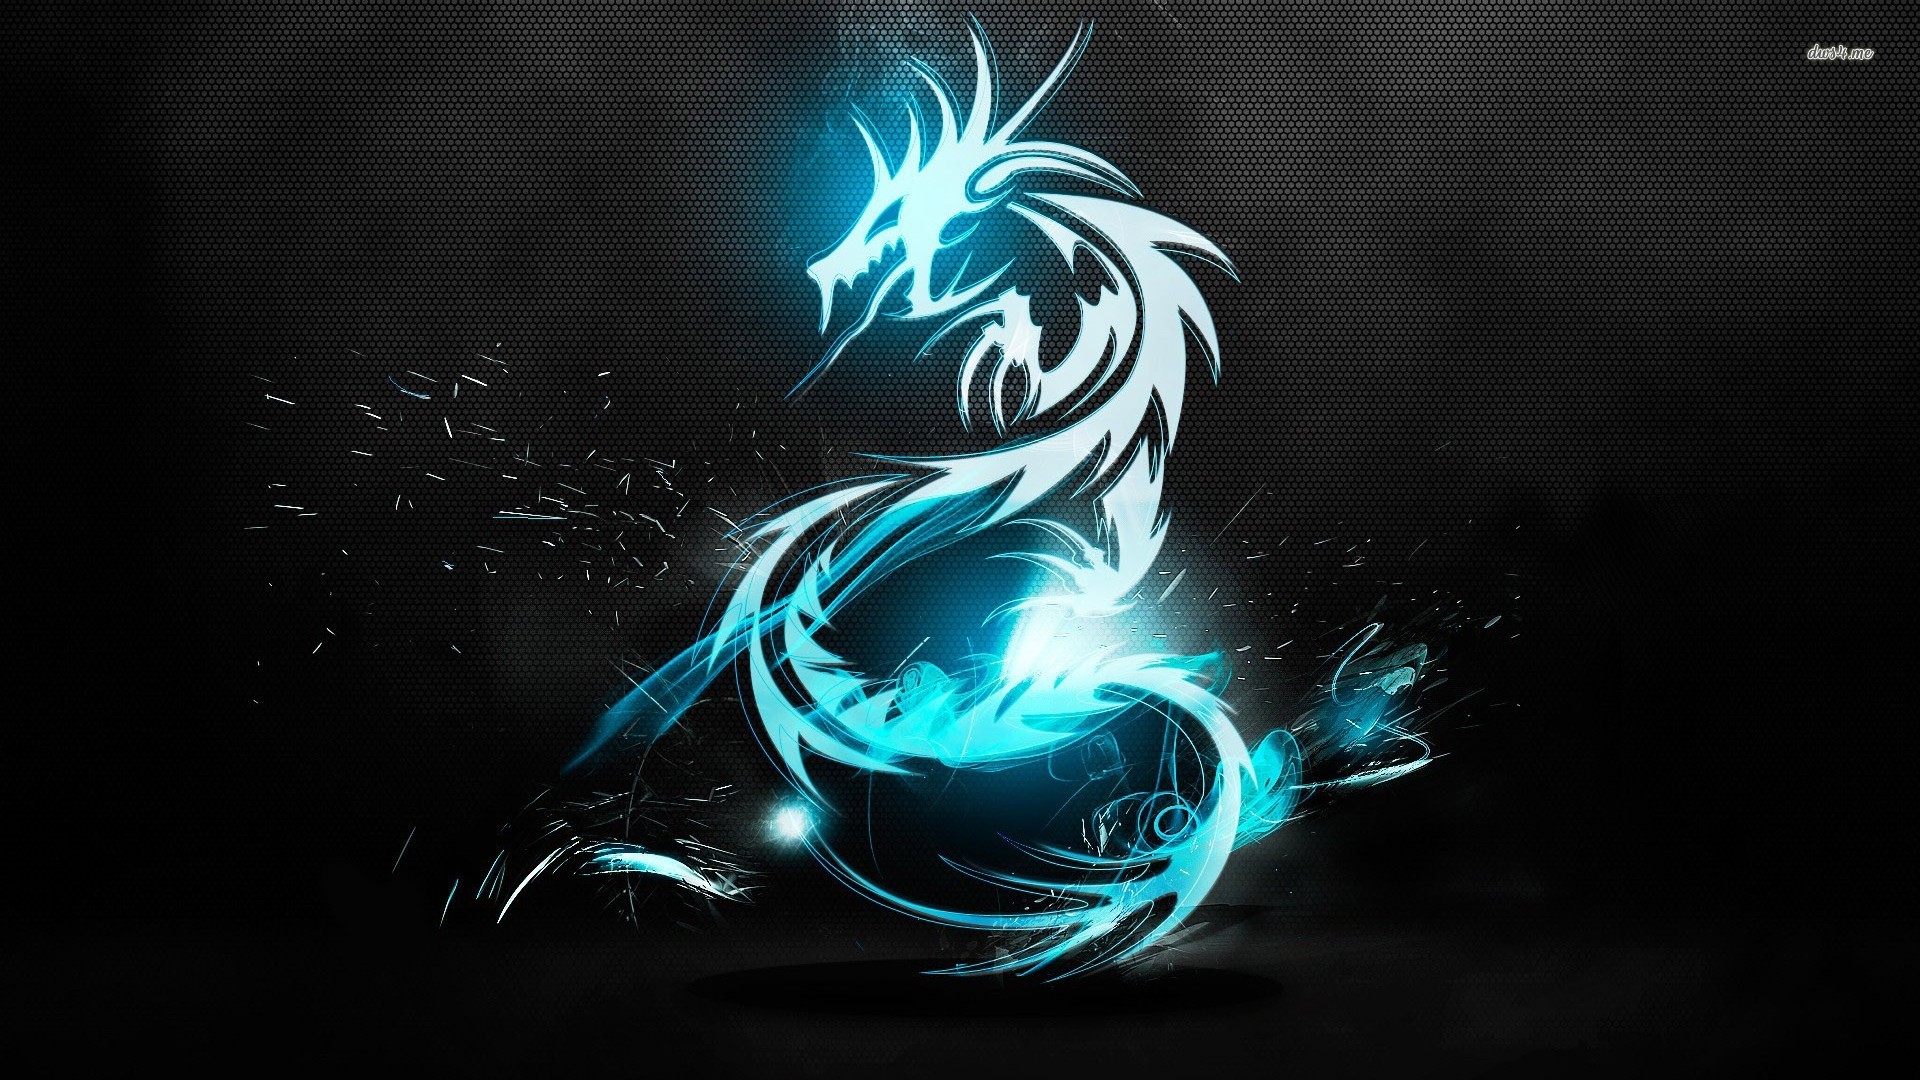 Dragon Wallpapers, Creative Dragon Wallpapers - #WP:FP51 GZHaixieR